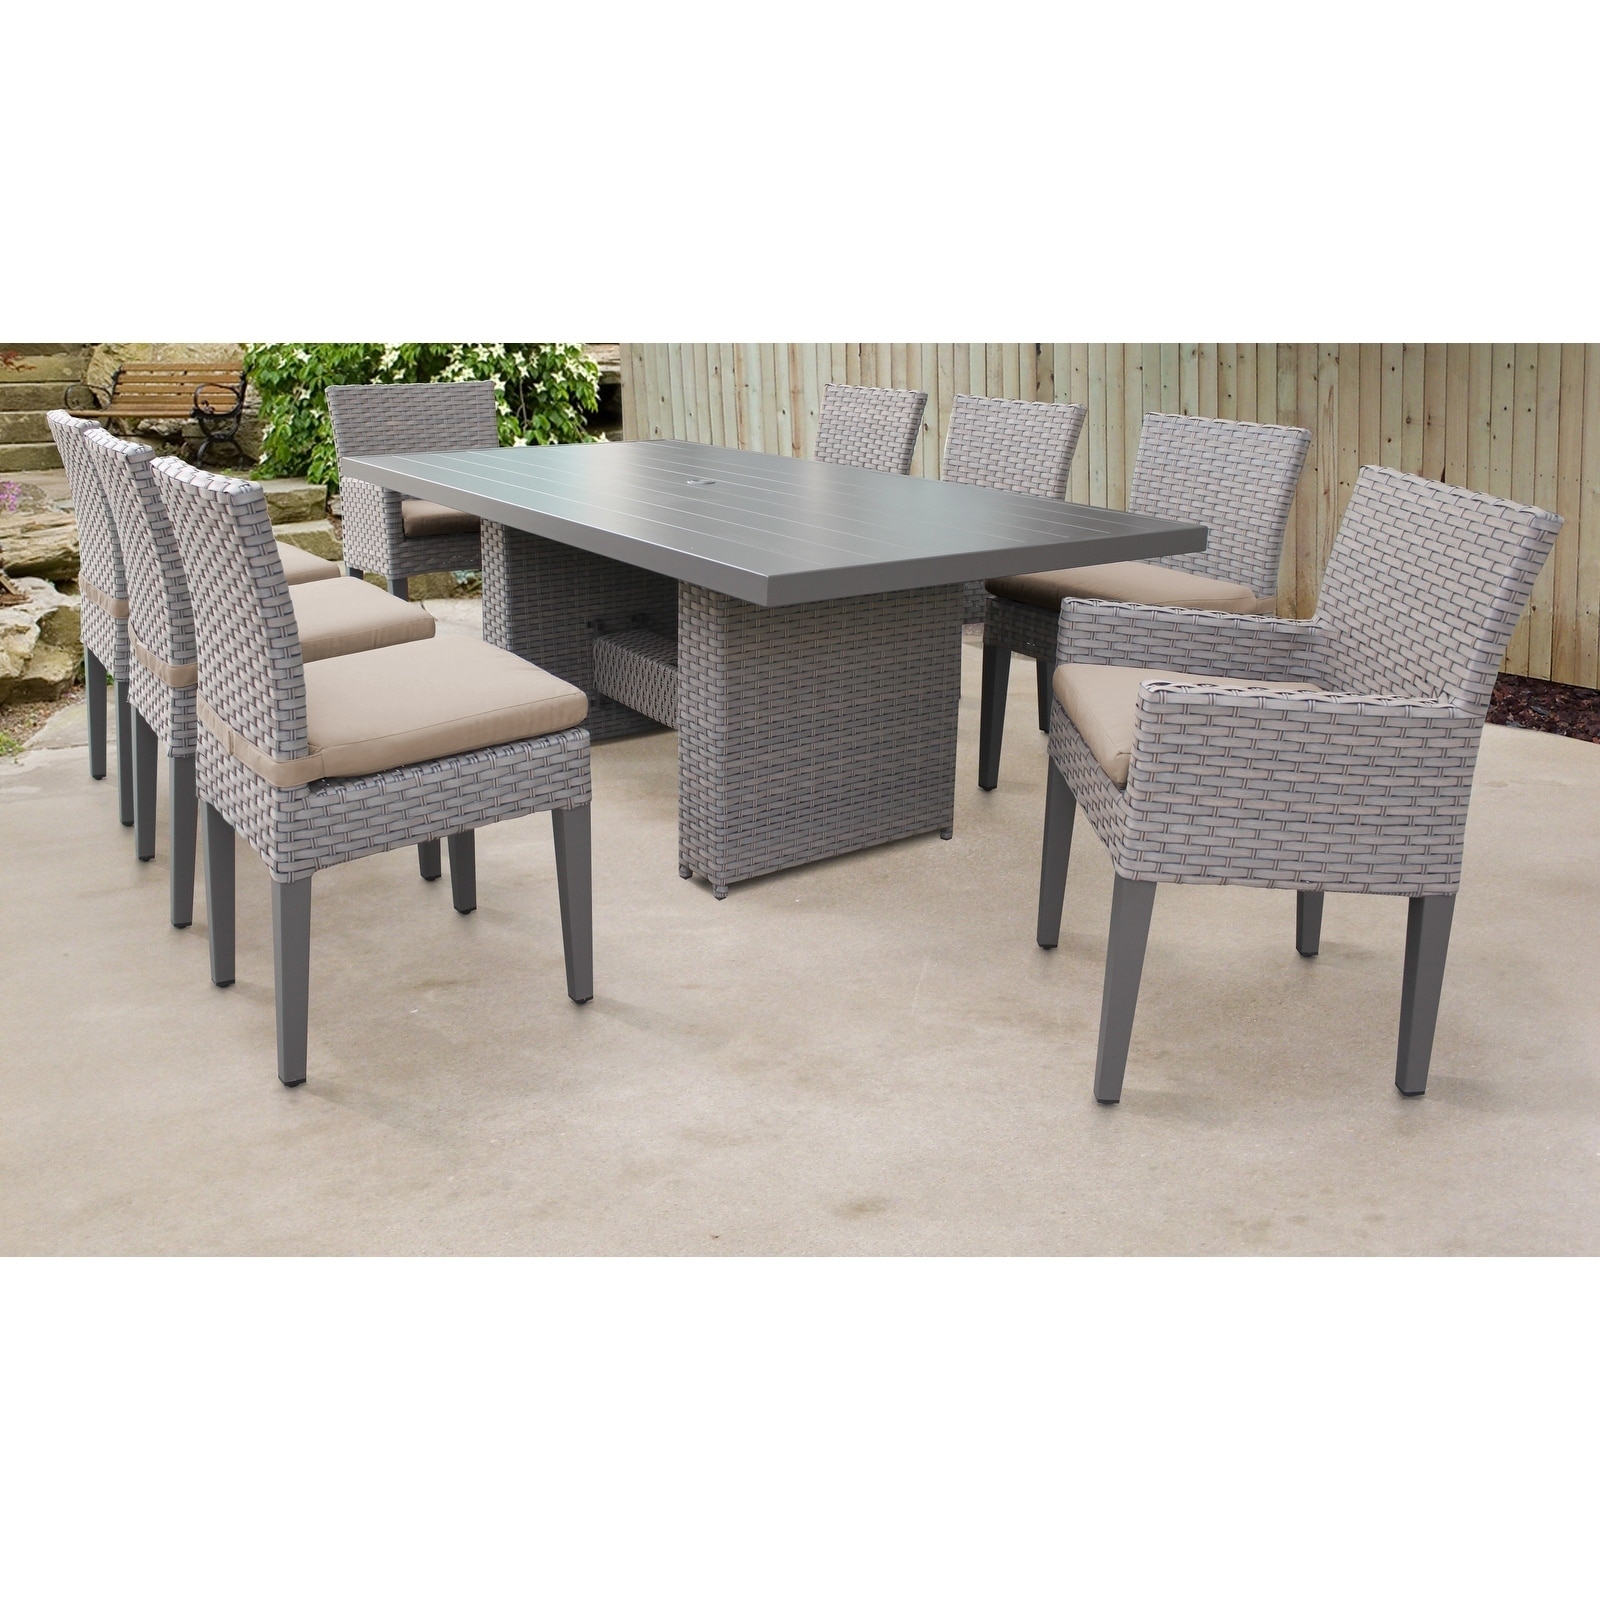 Florence Rectangular Outdoor Patio Dining Table With 6 Armless Chairs And 2 Chairs W/ Arms